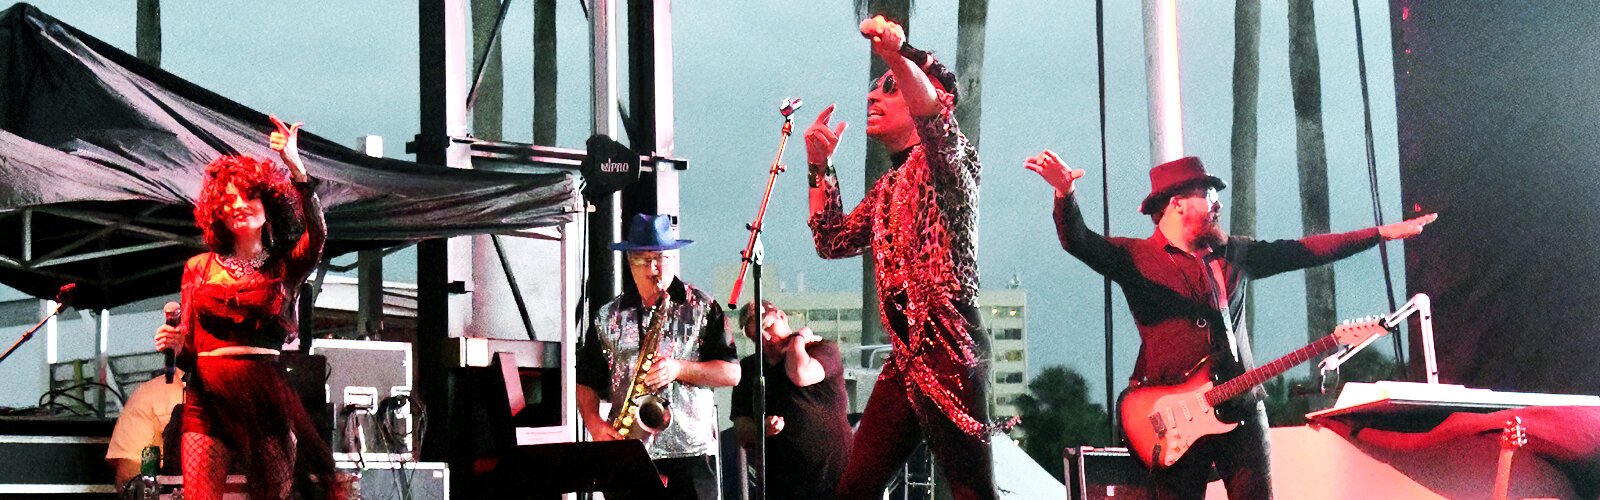 The lineup of tribute bands playing on the main stage of Curtis Hixon Waterfront Park during Tampa Riverfest included Prince tribute artist Sir Jac and his Purple Fame Band.